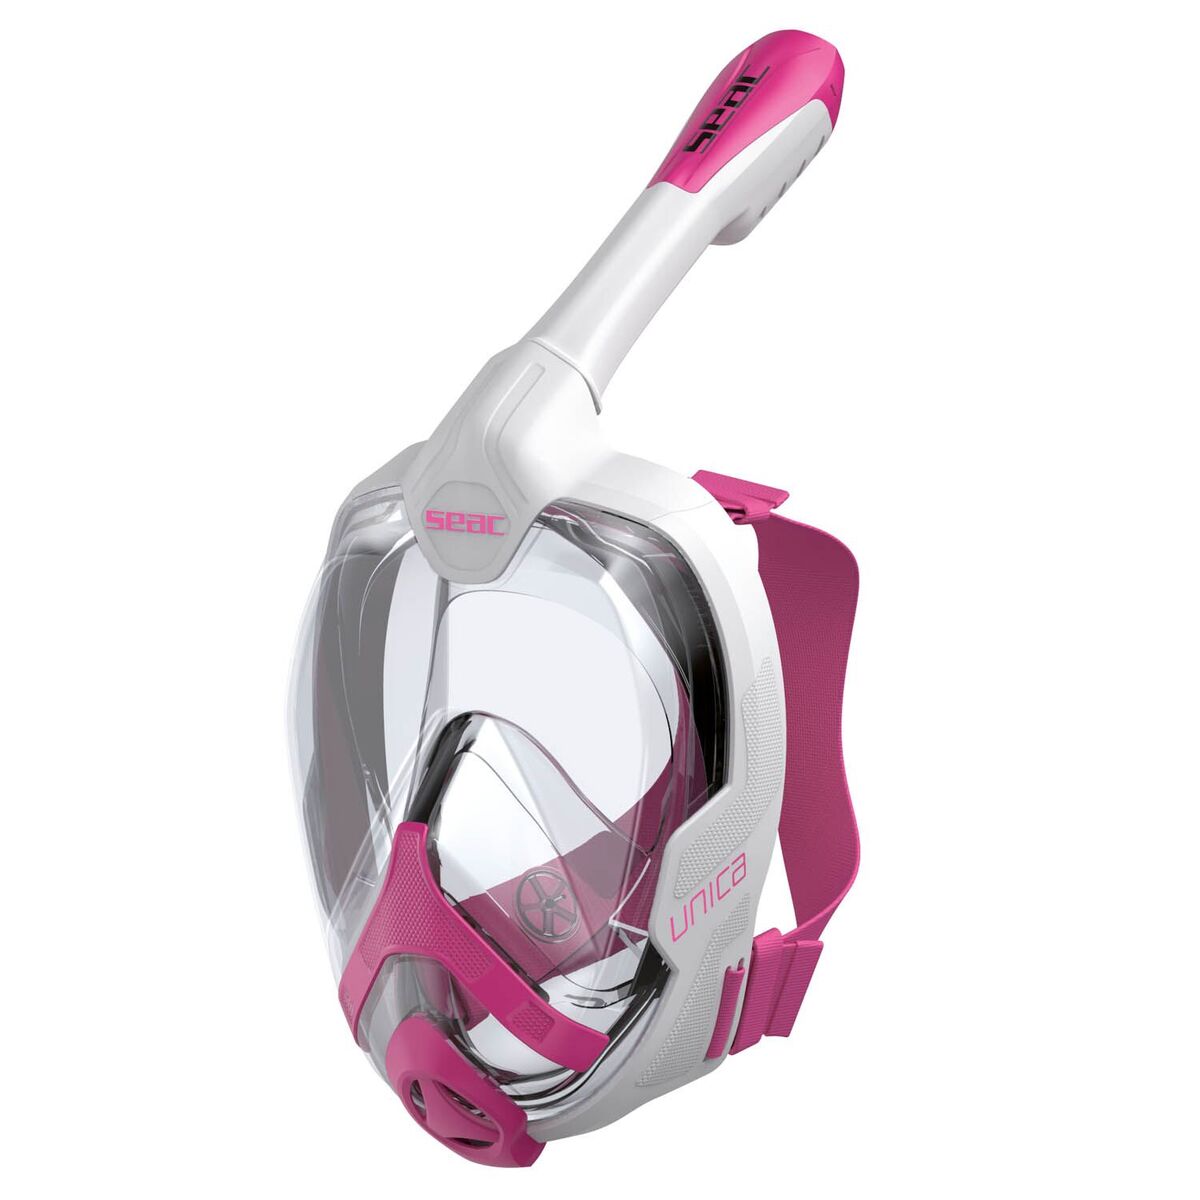 Seac Sub Unica Snorkeling Mask - S-M in Pink